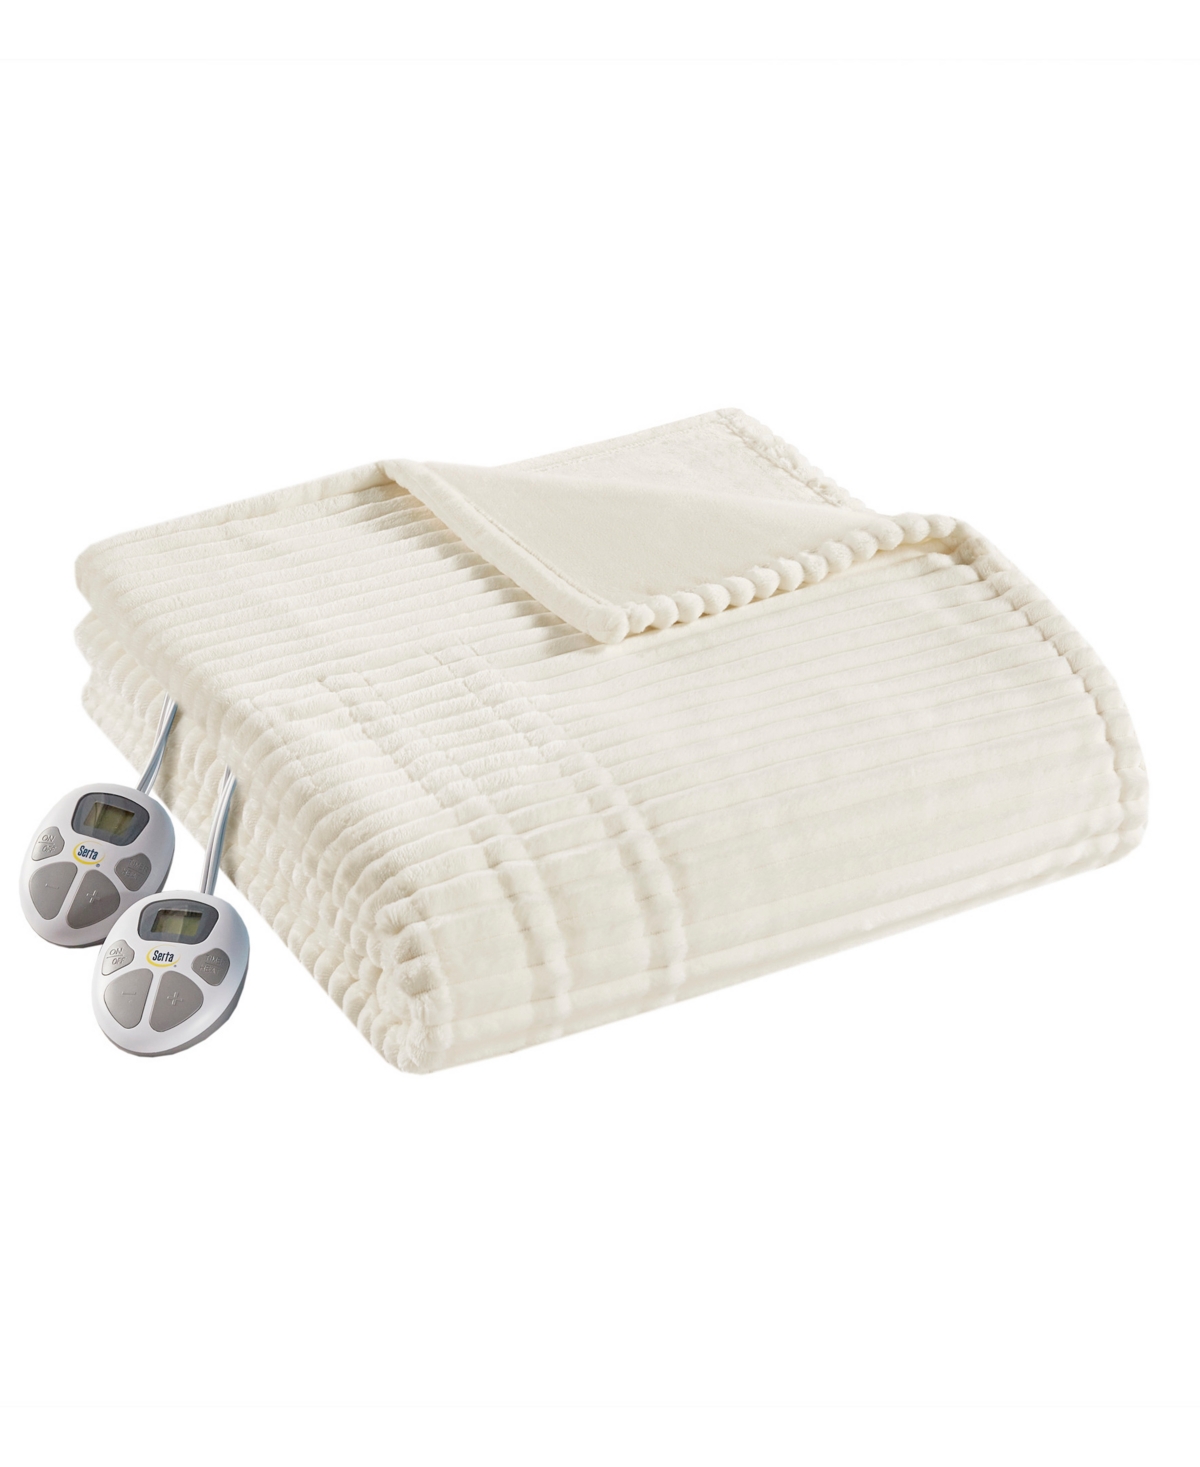 Serta Corded Plush Heated Blanket, Queen In Ivory